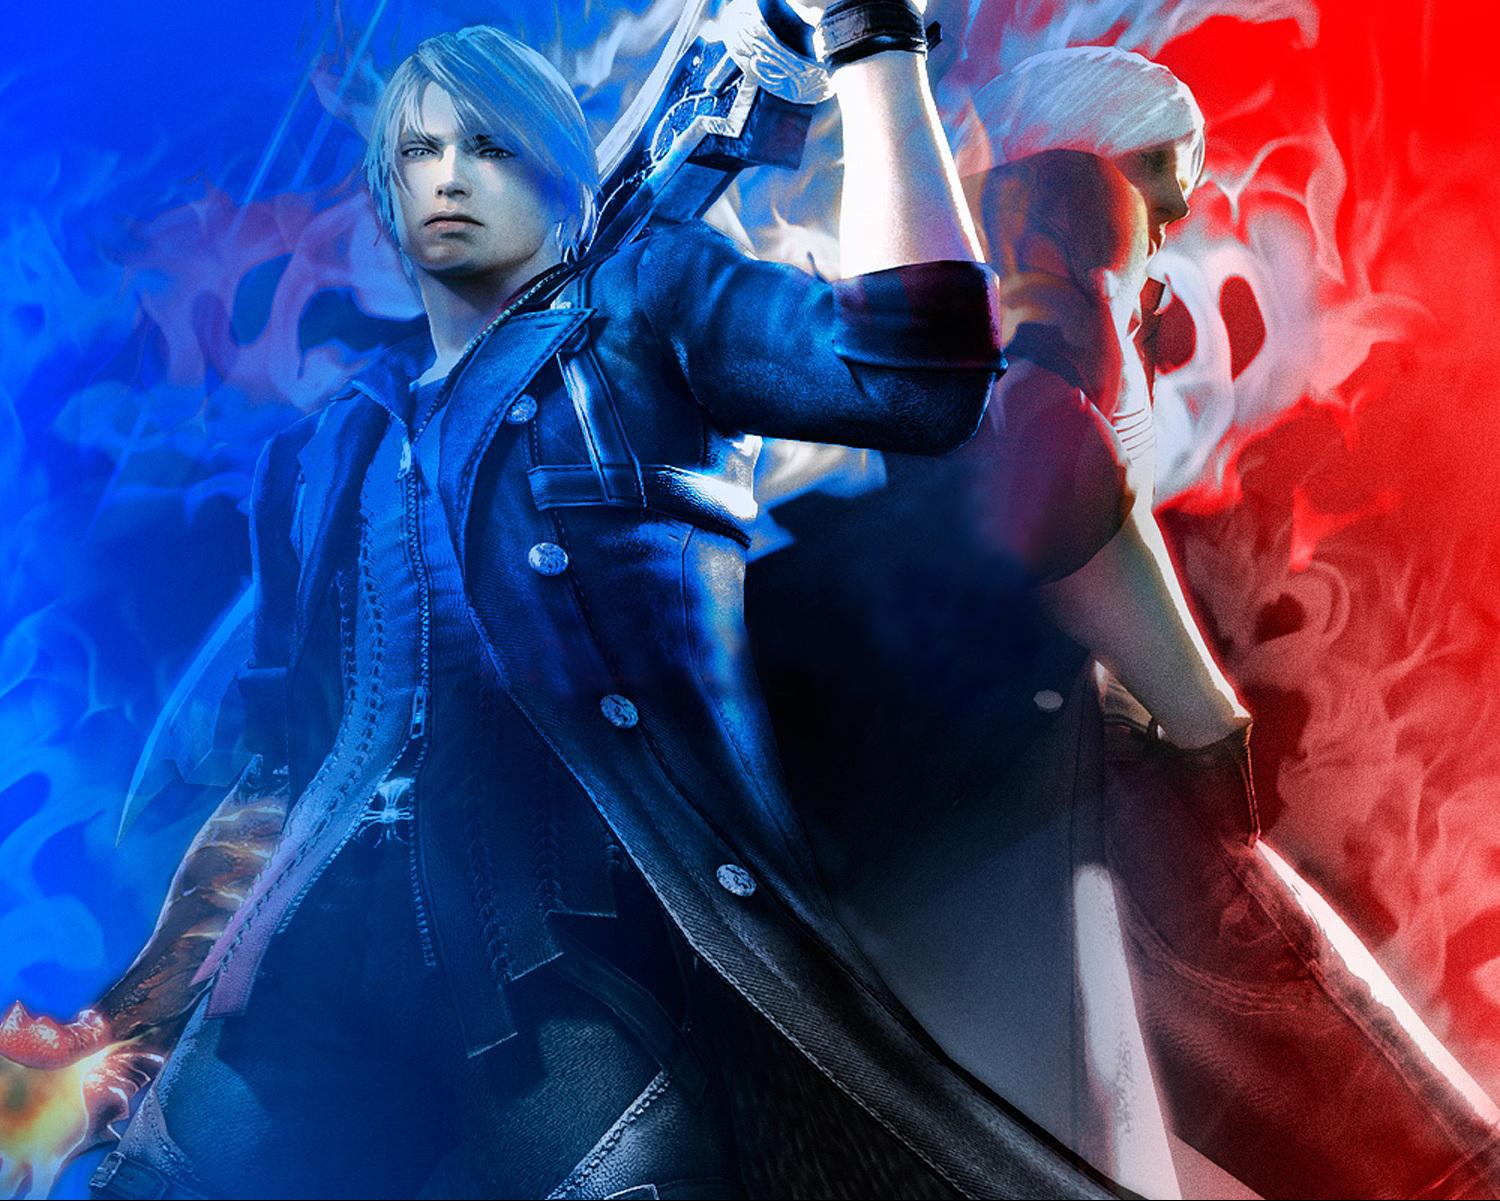 Achtergrond Devil May Cry Devil May Cry 4 Computerspellen videogames computerspel